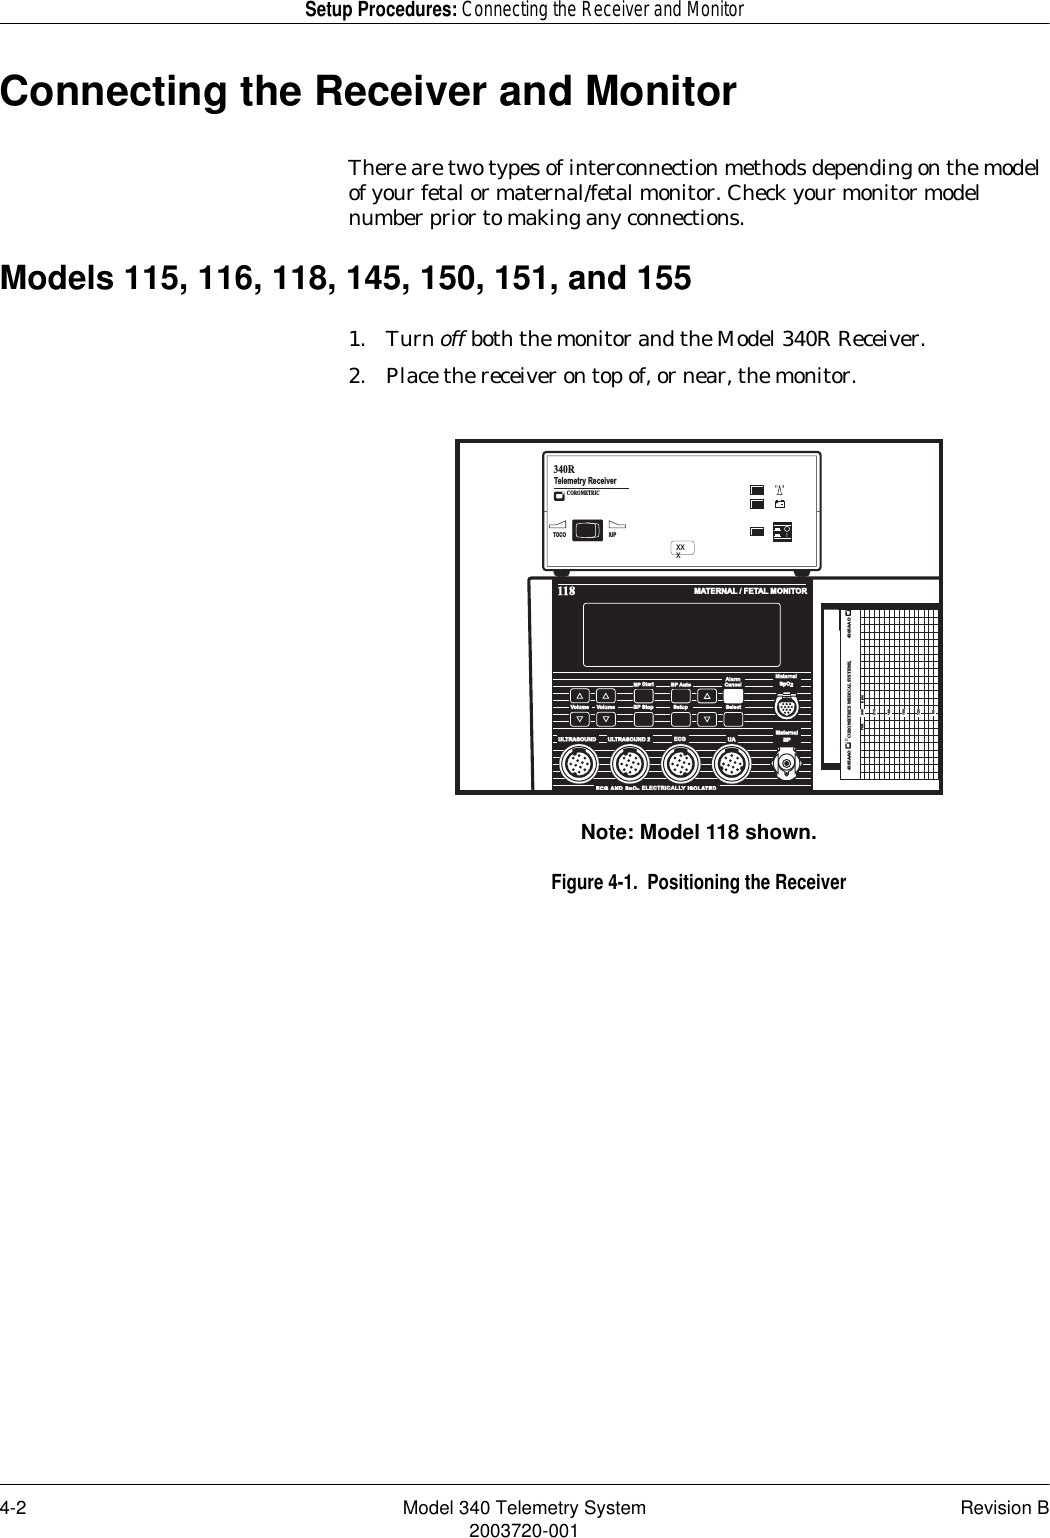 4-2 Model 340 Telemetry System Revision B2003720-001Setup Procedures: Connecting the Receiver and MonitorConnecting the Receiver and MonitorThere are two types of interconnection methods depending on the model of your fetal or maternal/fetal monitor. Check your monitor model number prior to making any connections.Models 115, 116, 118, 145, 150, 151, and 1551. Turn off both the monitor and the Model 340R Receiver.2. Place the receiver on top of, or near, the monitor.Note: Model 118 shown.Figure 4-1.  Positioning the ReceiverMATERNAL / FETAL MONITOR118MaternalBPULTRASOUND ULTRASOUND 2 ECGECGUAECG AND  SpO2  ELECTRICALL ELECTRICALLY ISOLATEDREFER TO  MANUAL  FOR  PROPER  TRANSDUCERSVolume Volume BP Stop Setup SelectBP Start StartBP AutoAlarmAlarmCancelMaternalMaternalSpO24305AAOCOROMETRICS MEDICAL SYSTEMS,4305AAOFHR bpm90120150180240210IUPTOCOTelemetry Receiver 340R+COROMETRICXXX